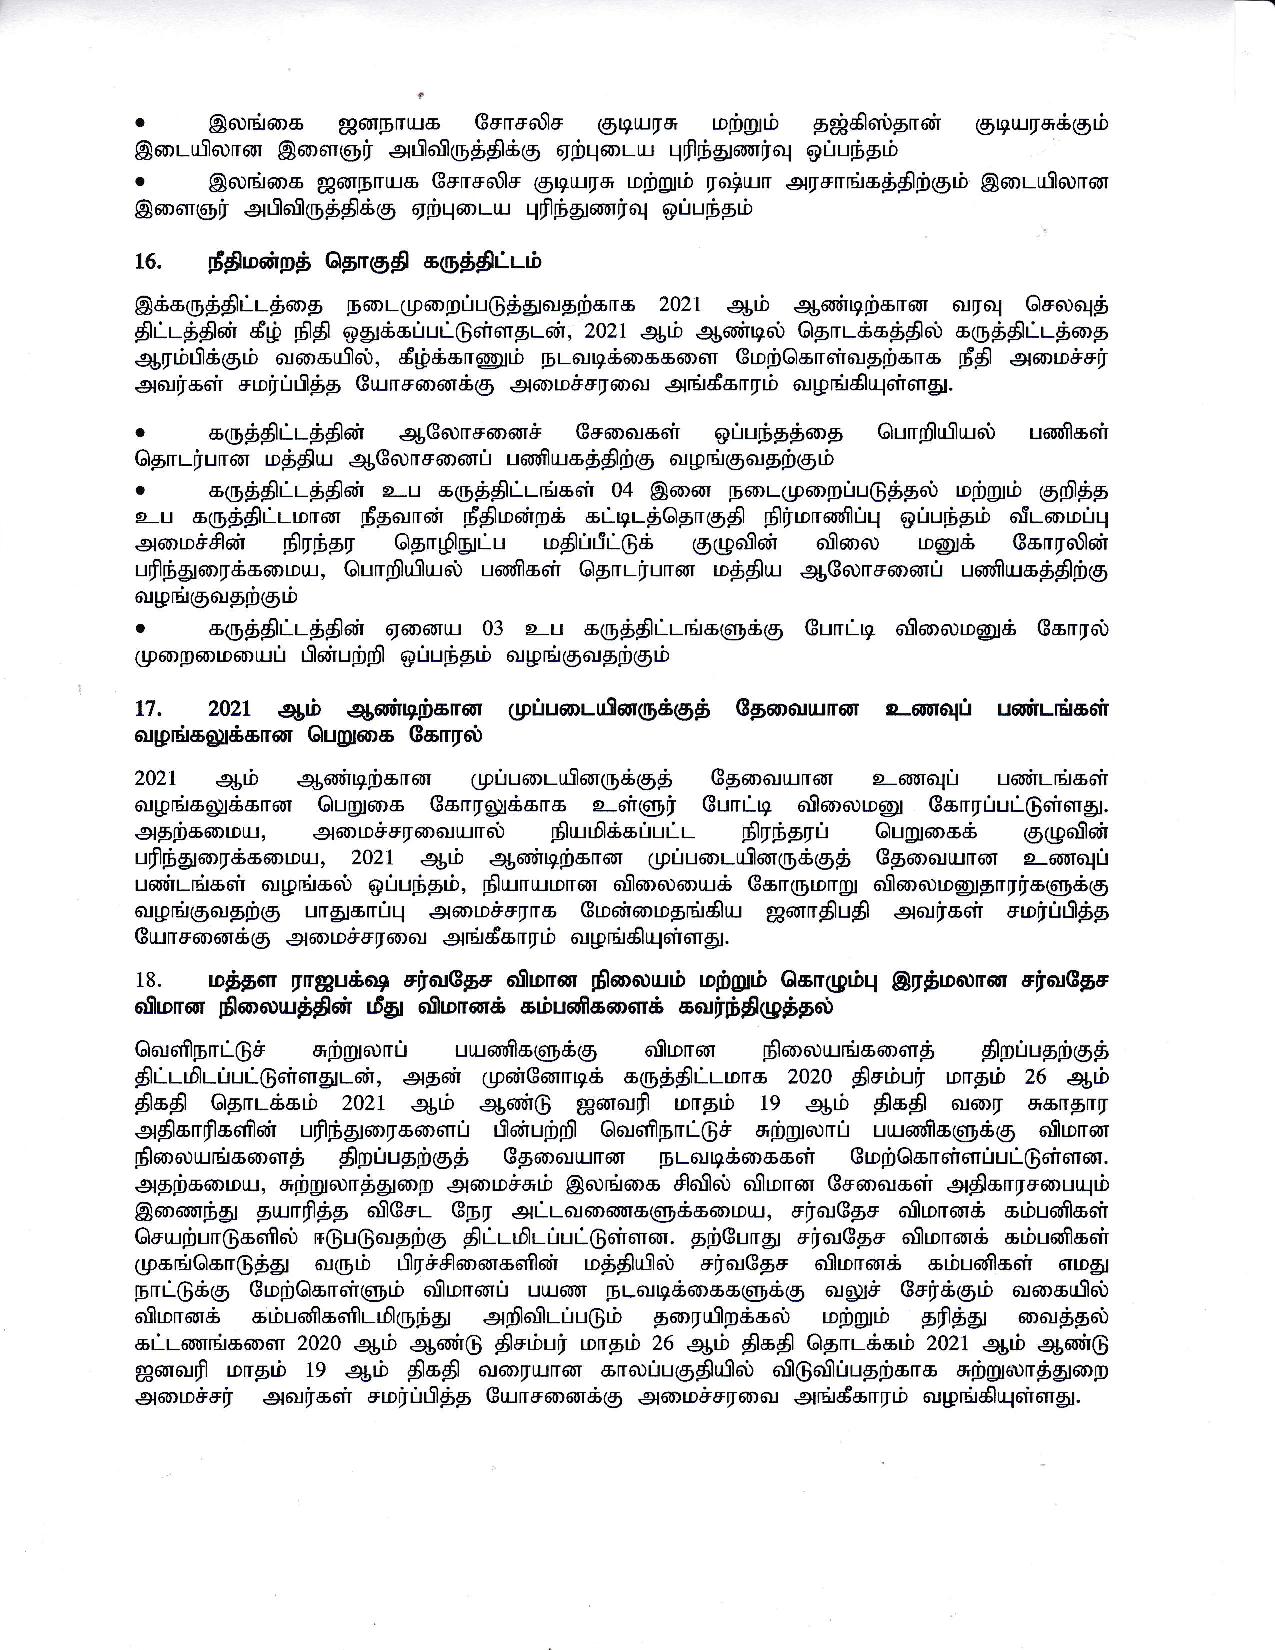 Cabinet Decision on 21.12.2020 Tamil page 006